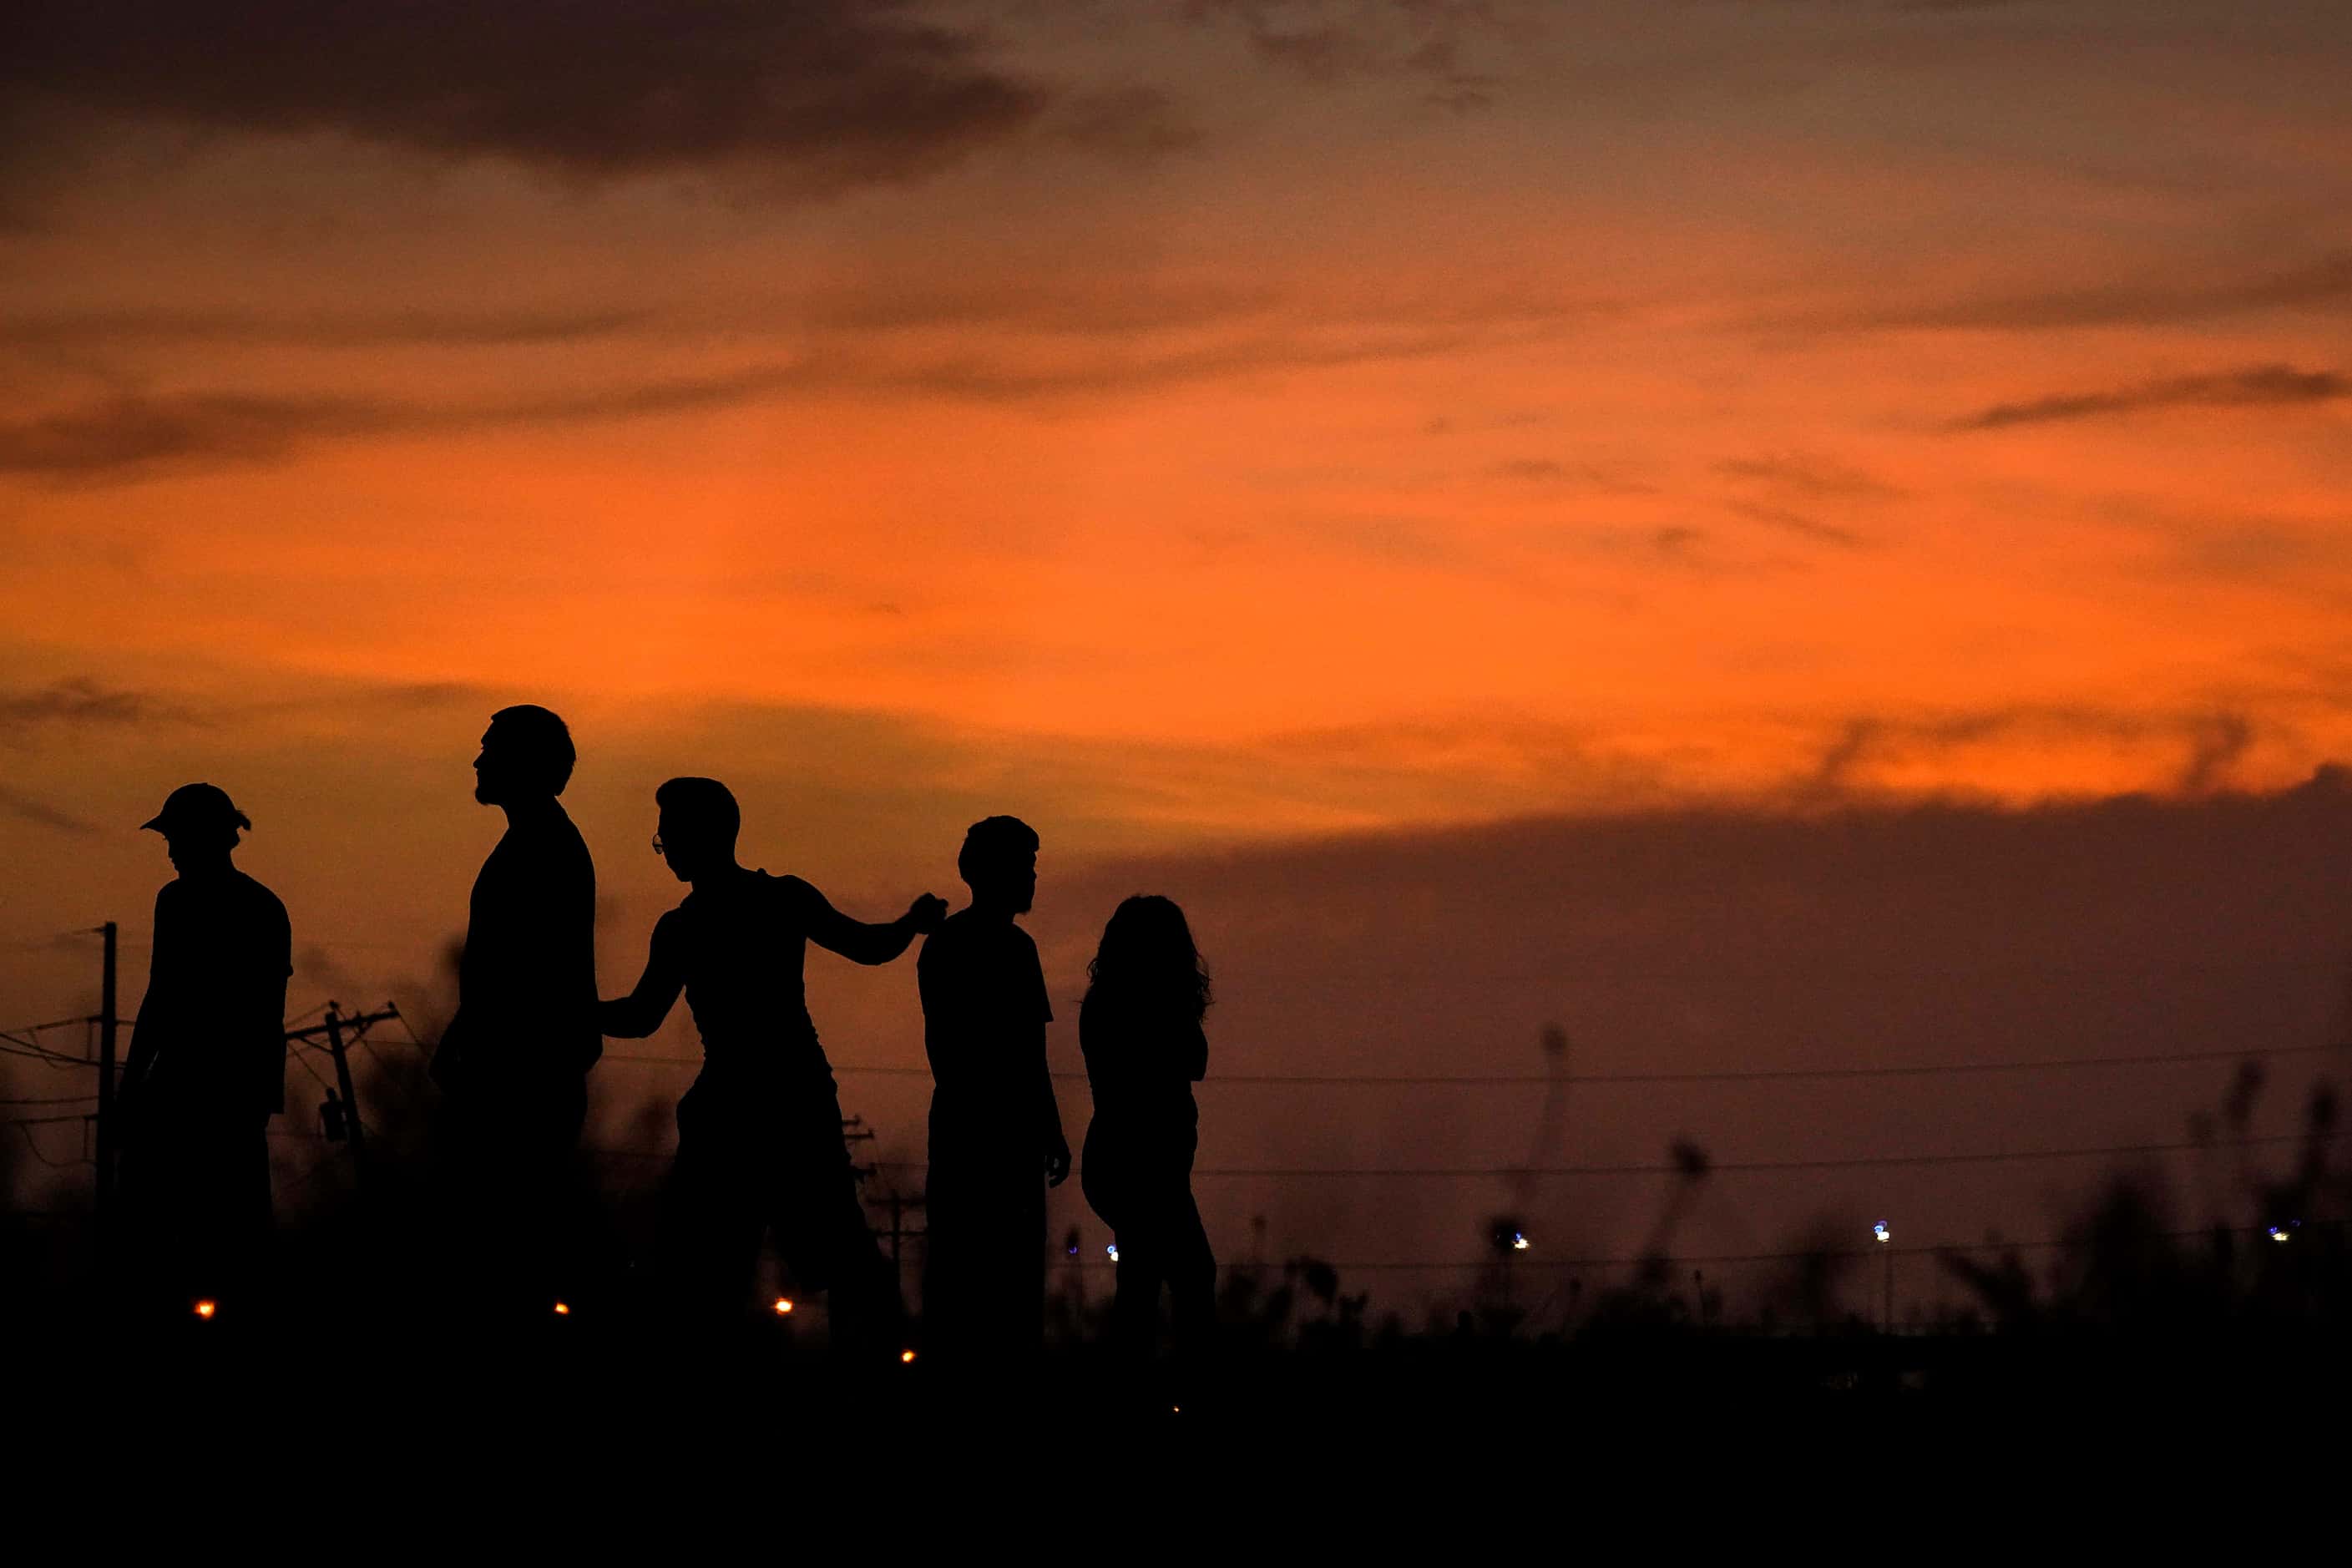 The lingering colors of sunset silhouette young people gathered on the Trinity Skyline Trail...